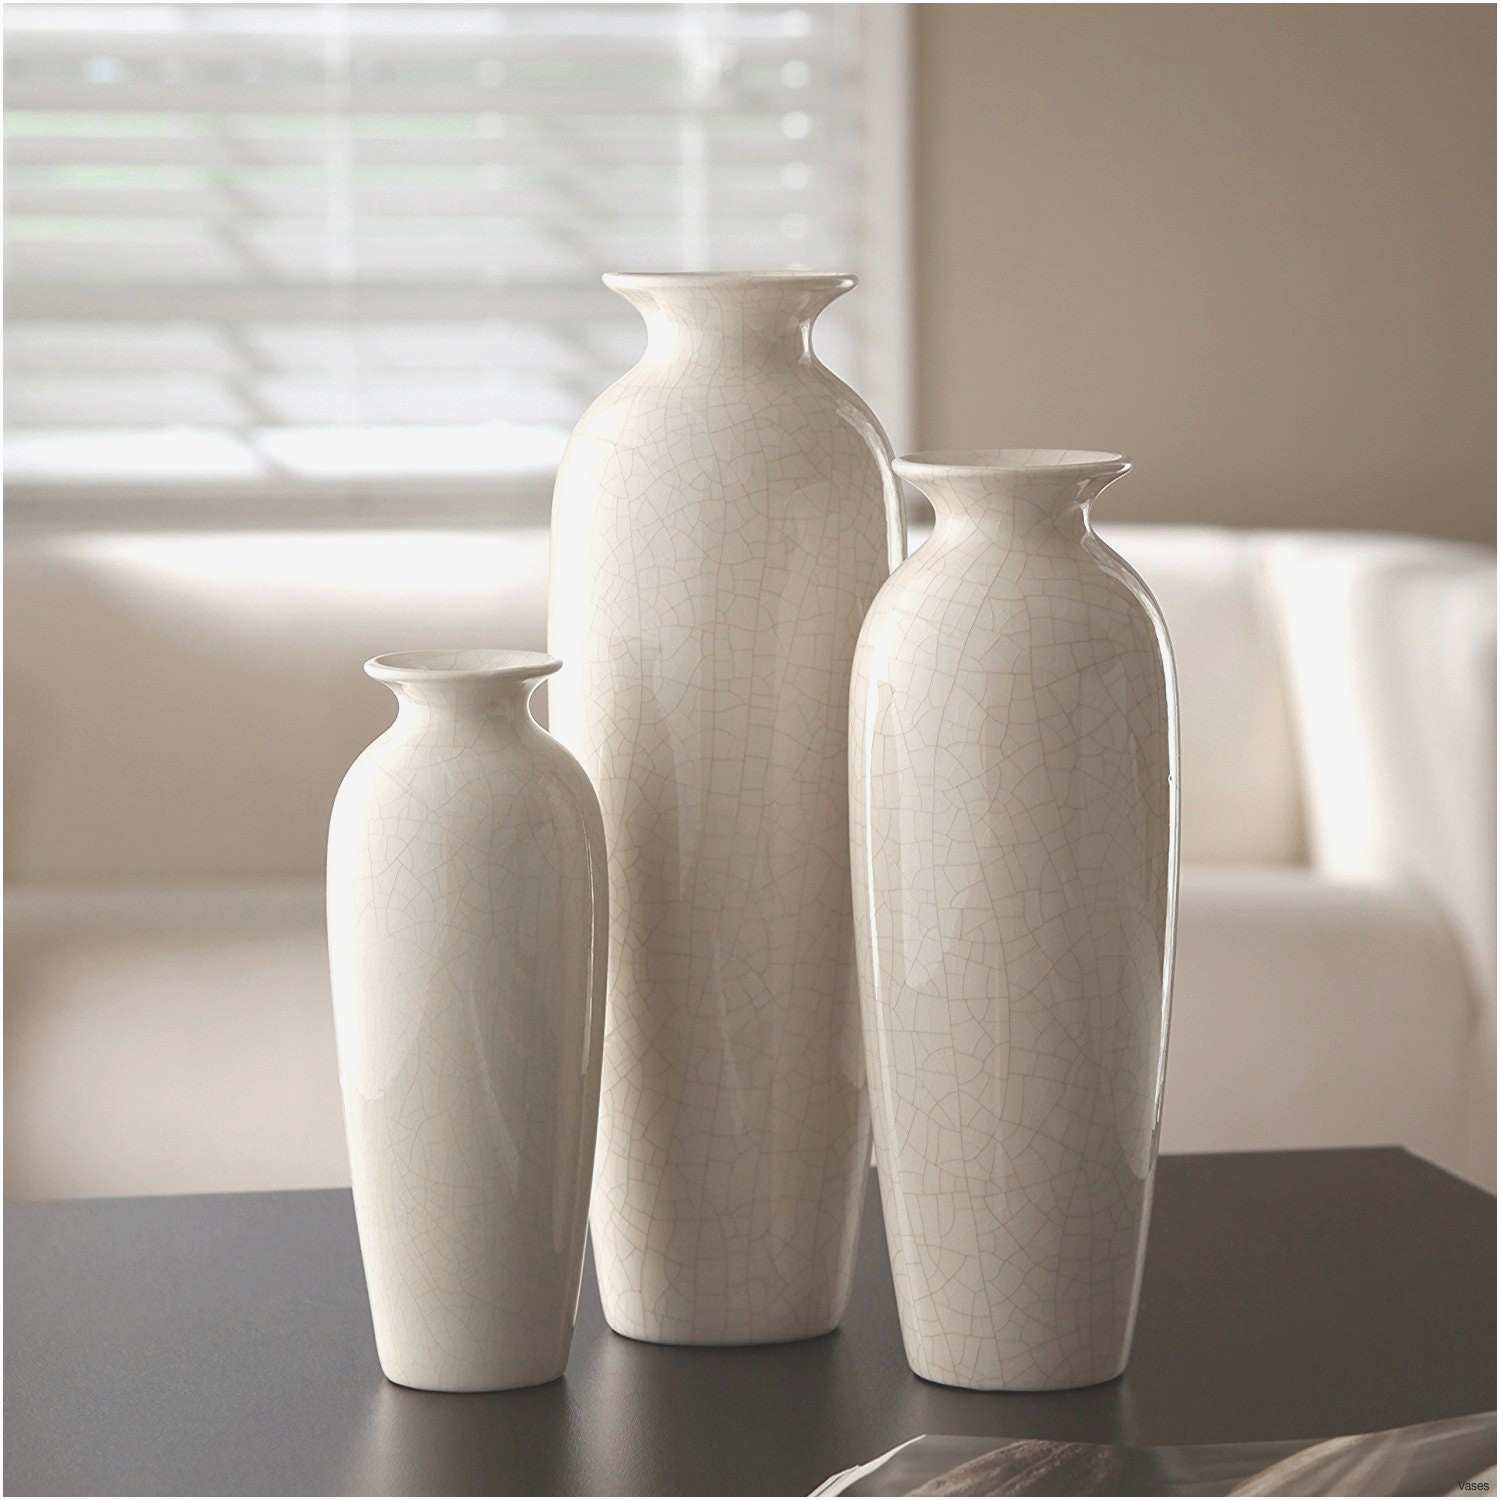 13 Great White Ceramic Vase Set 2024 free download white ceramic vase set of ceramic vase set collection area floor rugs new joaquin gray vases within ceramic vase set collection beautiful gift ideas for wedding of ceramic vase set collectio